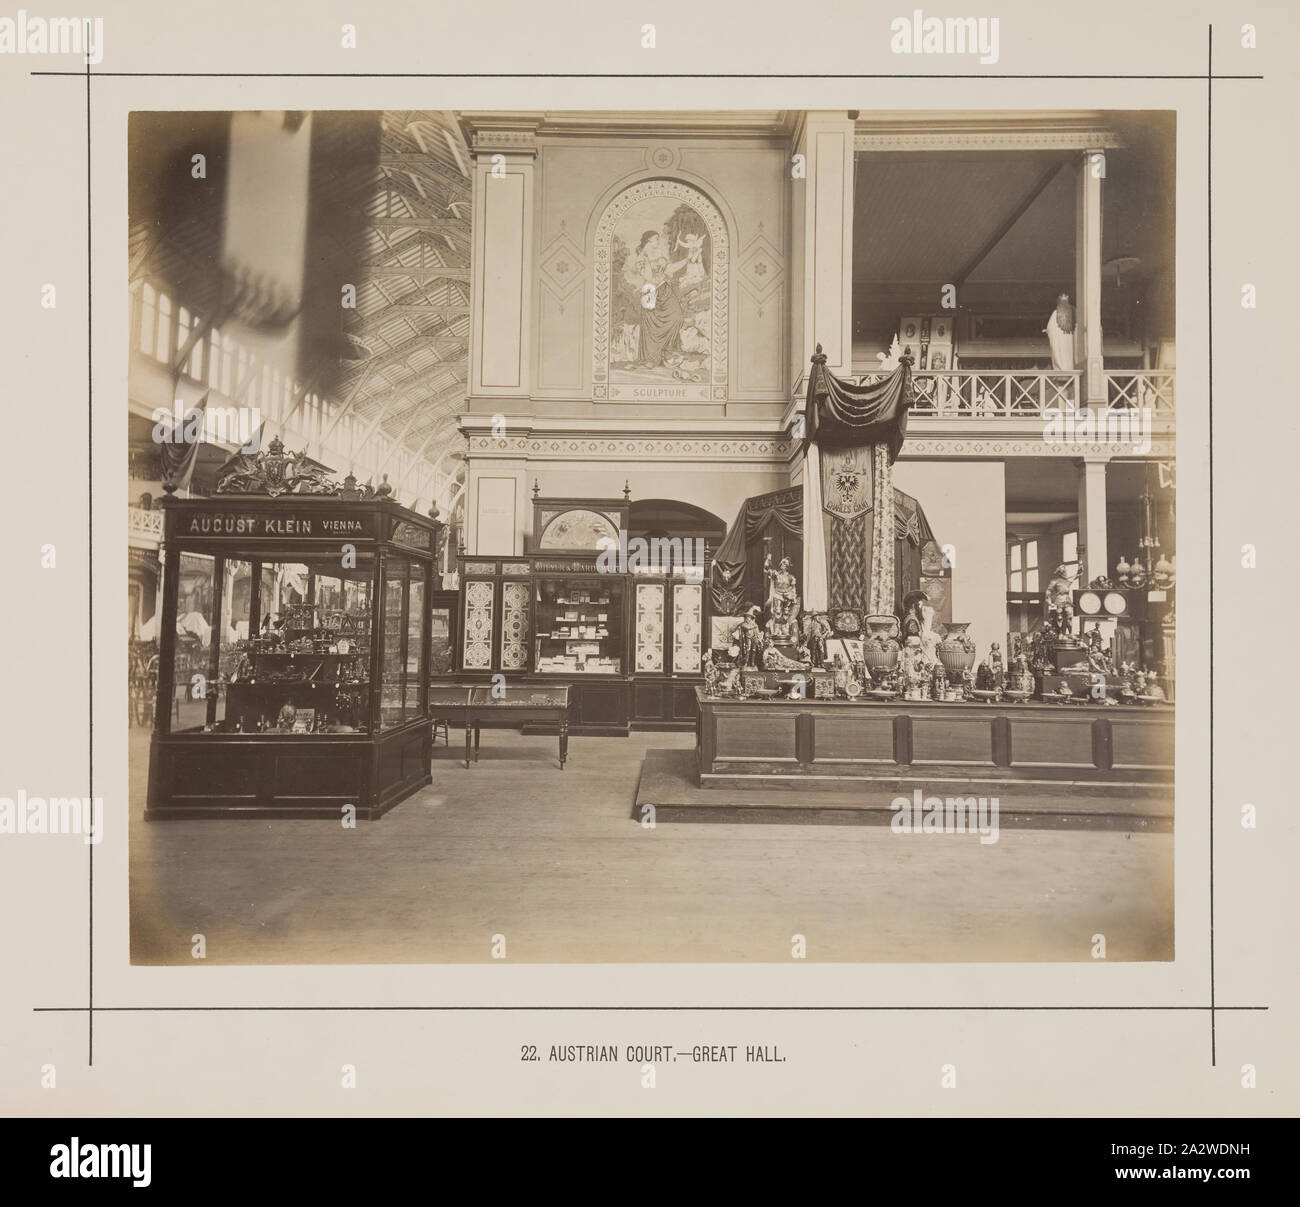 Photograph - Austrian Court, Great Hall, Exhibition Building, 1880-1881, View of some of the Austrian exhibits, including the display of August Klein of Vienna, in the transept of the Great Hall at the 1880 Melbourne International Exhibition held at the Exhibition Buildings, Carlton Gardens, between 1 October 1880 and 30 April 1881. In addition to the main permanent Exhibition Building, two permanent annexes as well as a large, central wooden temporary annexe Stock Photo